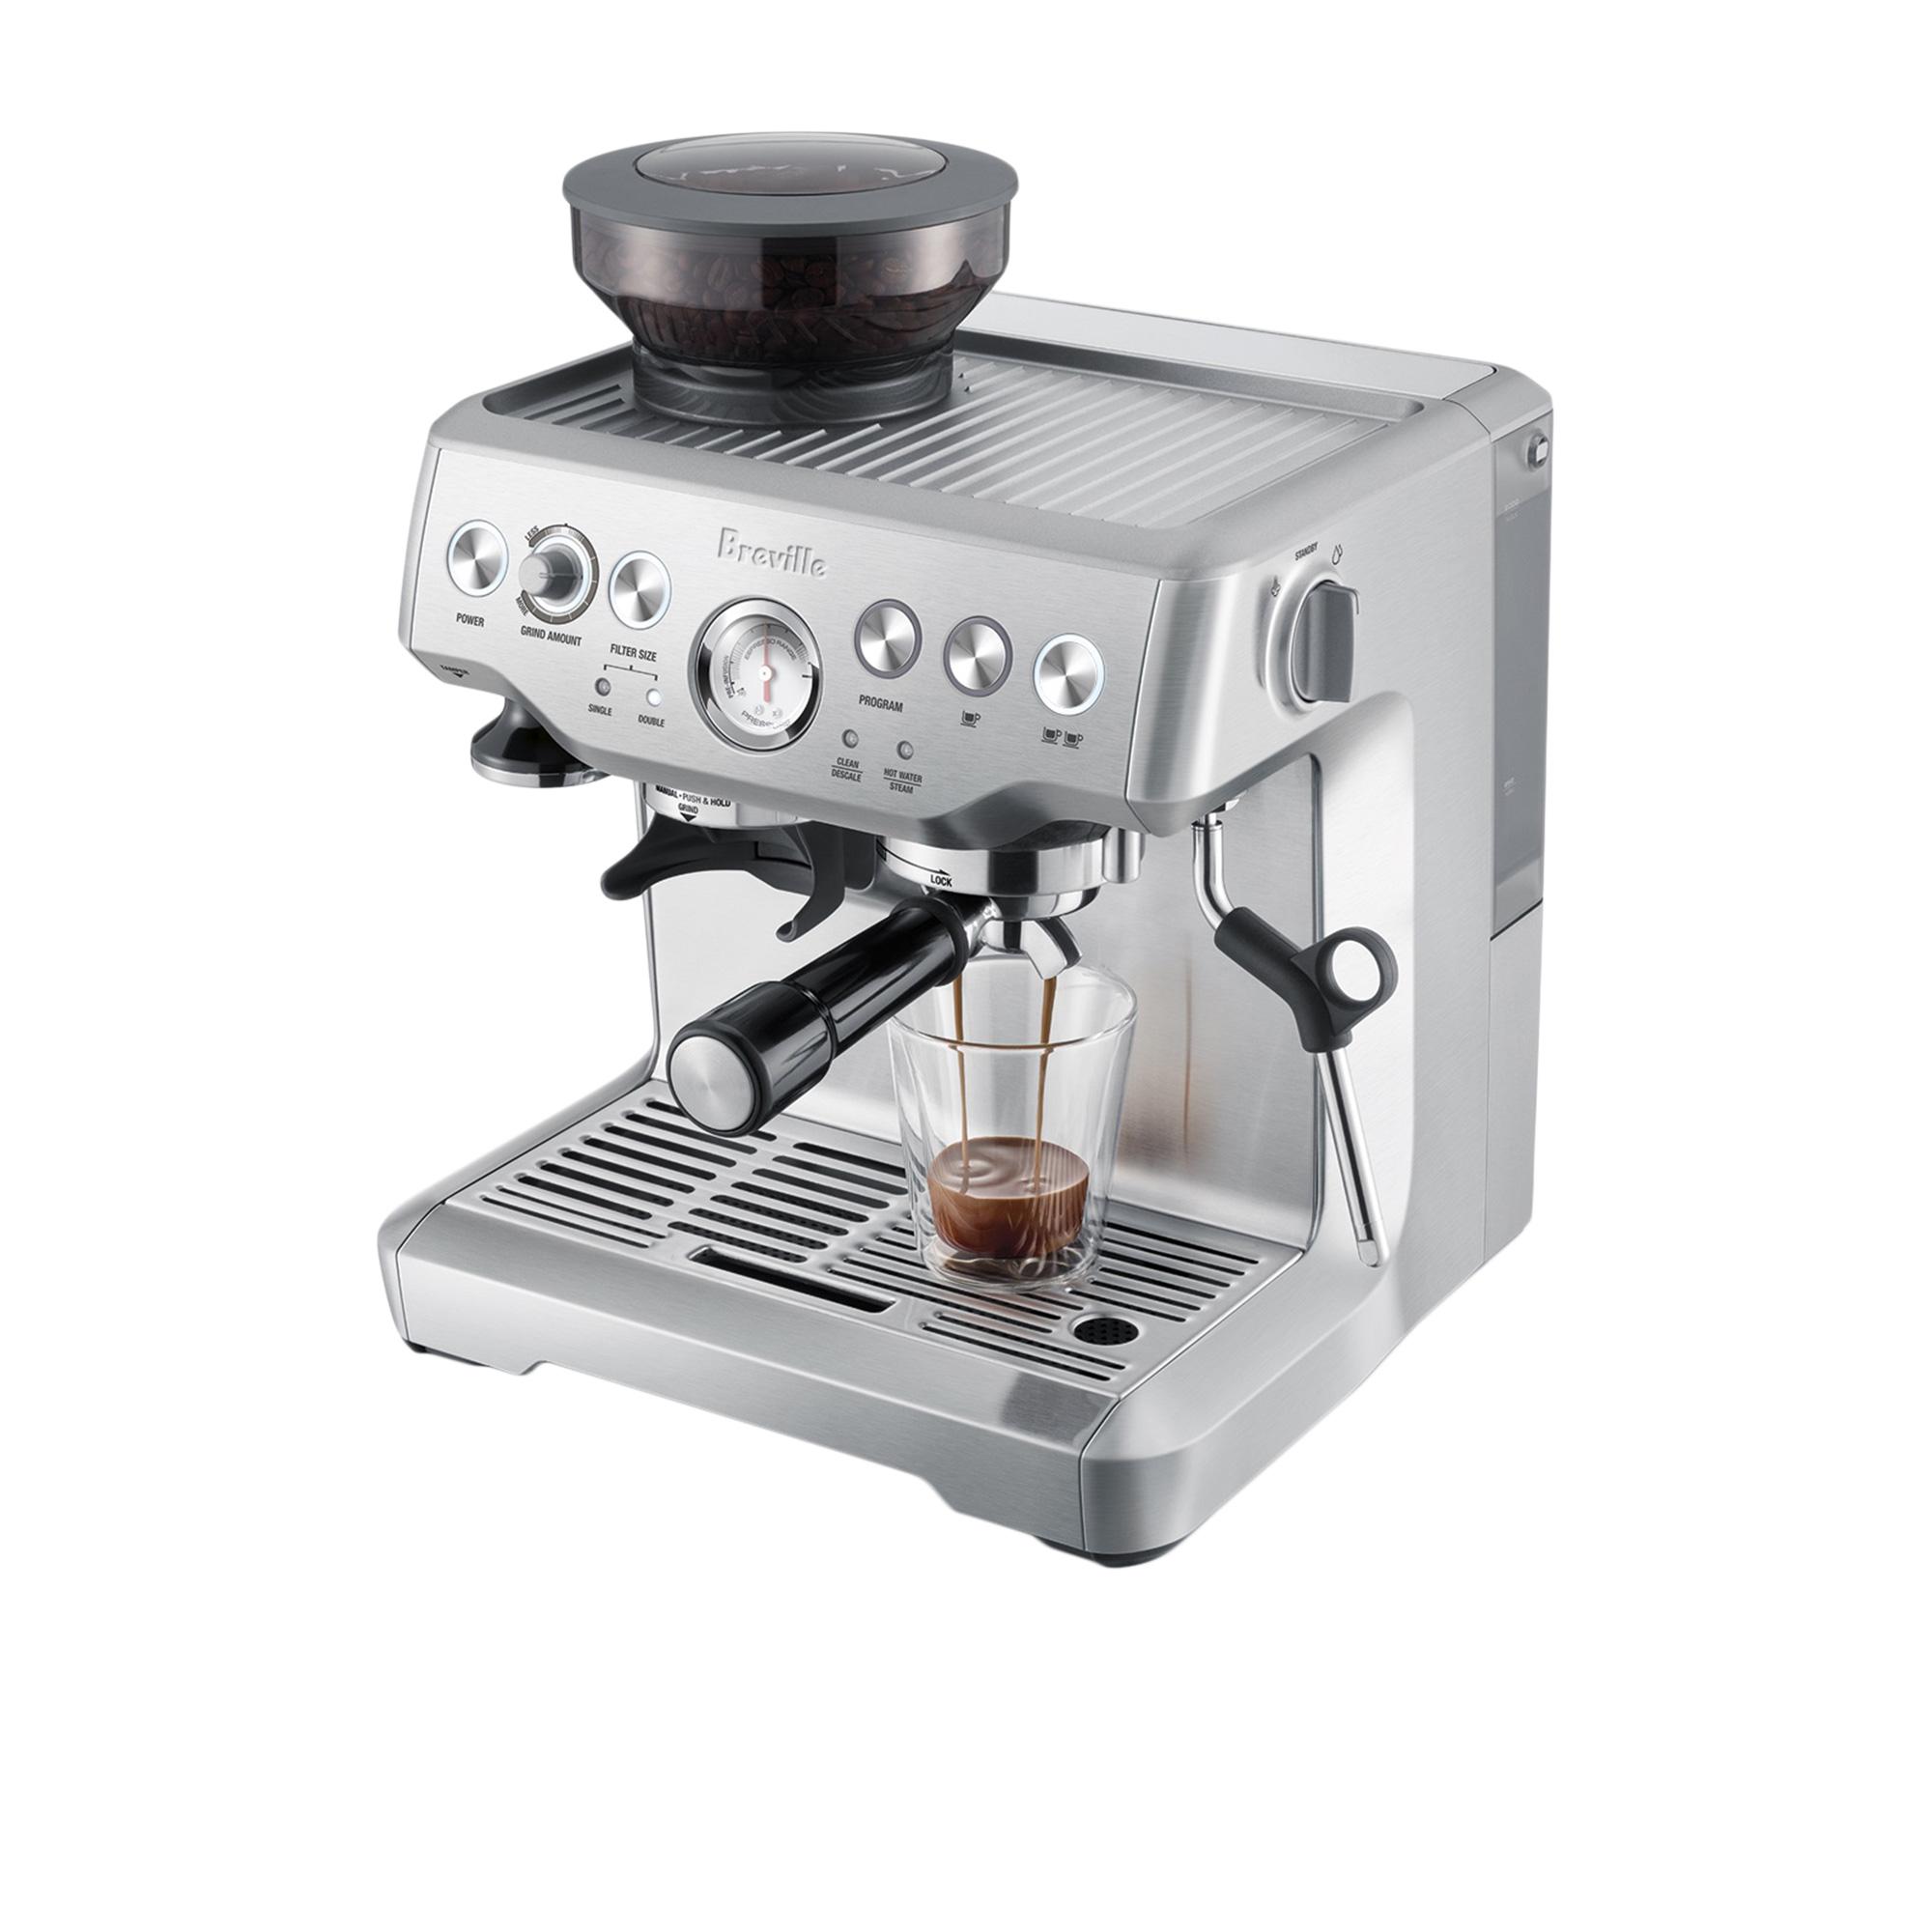 Breville The Barista Express Espresso Machine Brushed Stainless Steel Image 4